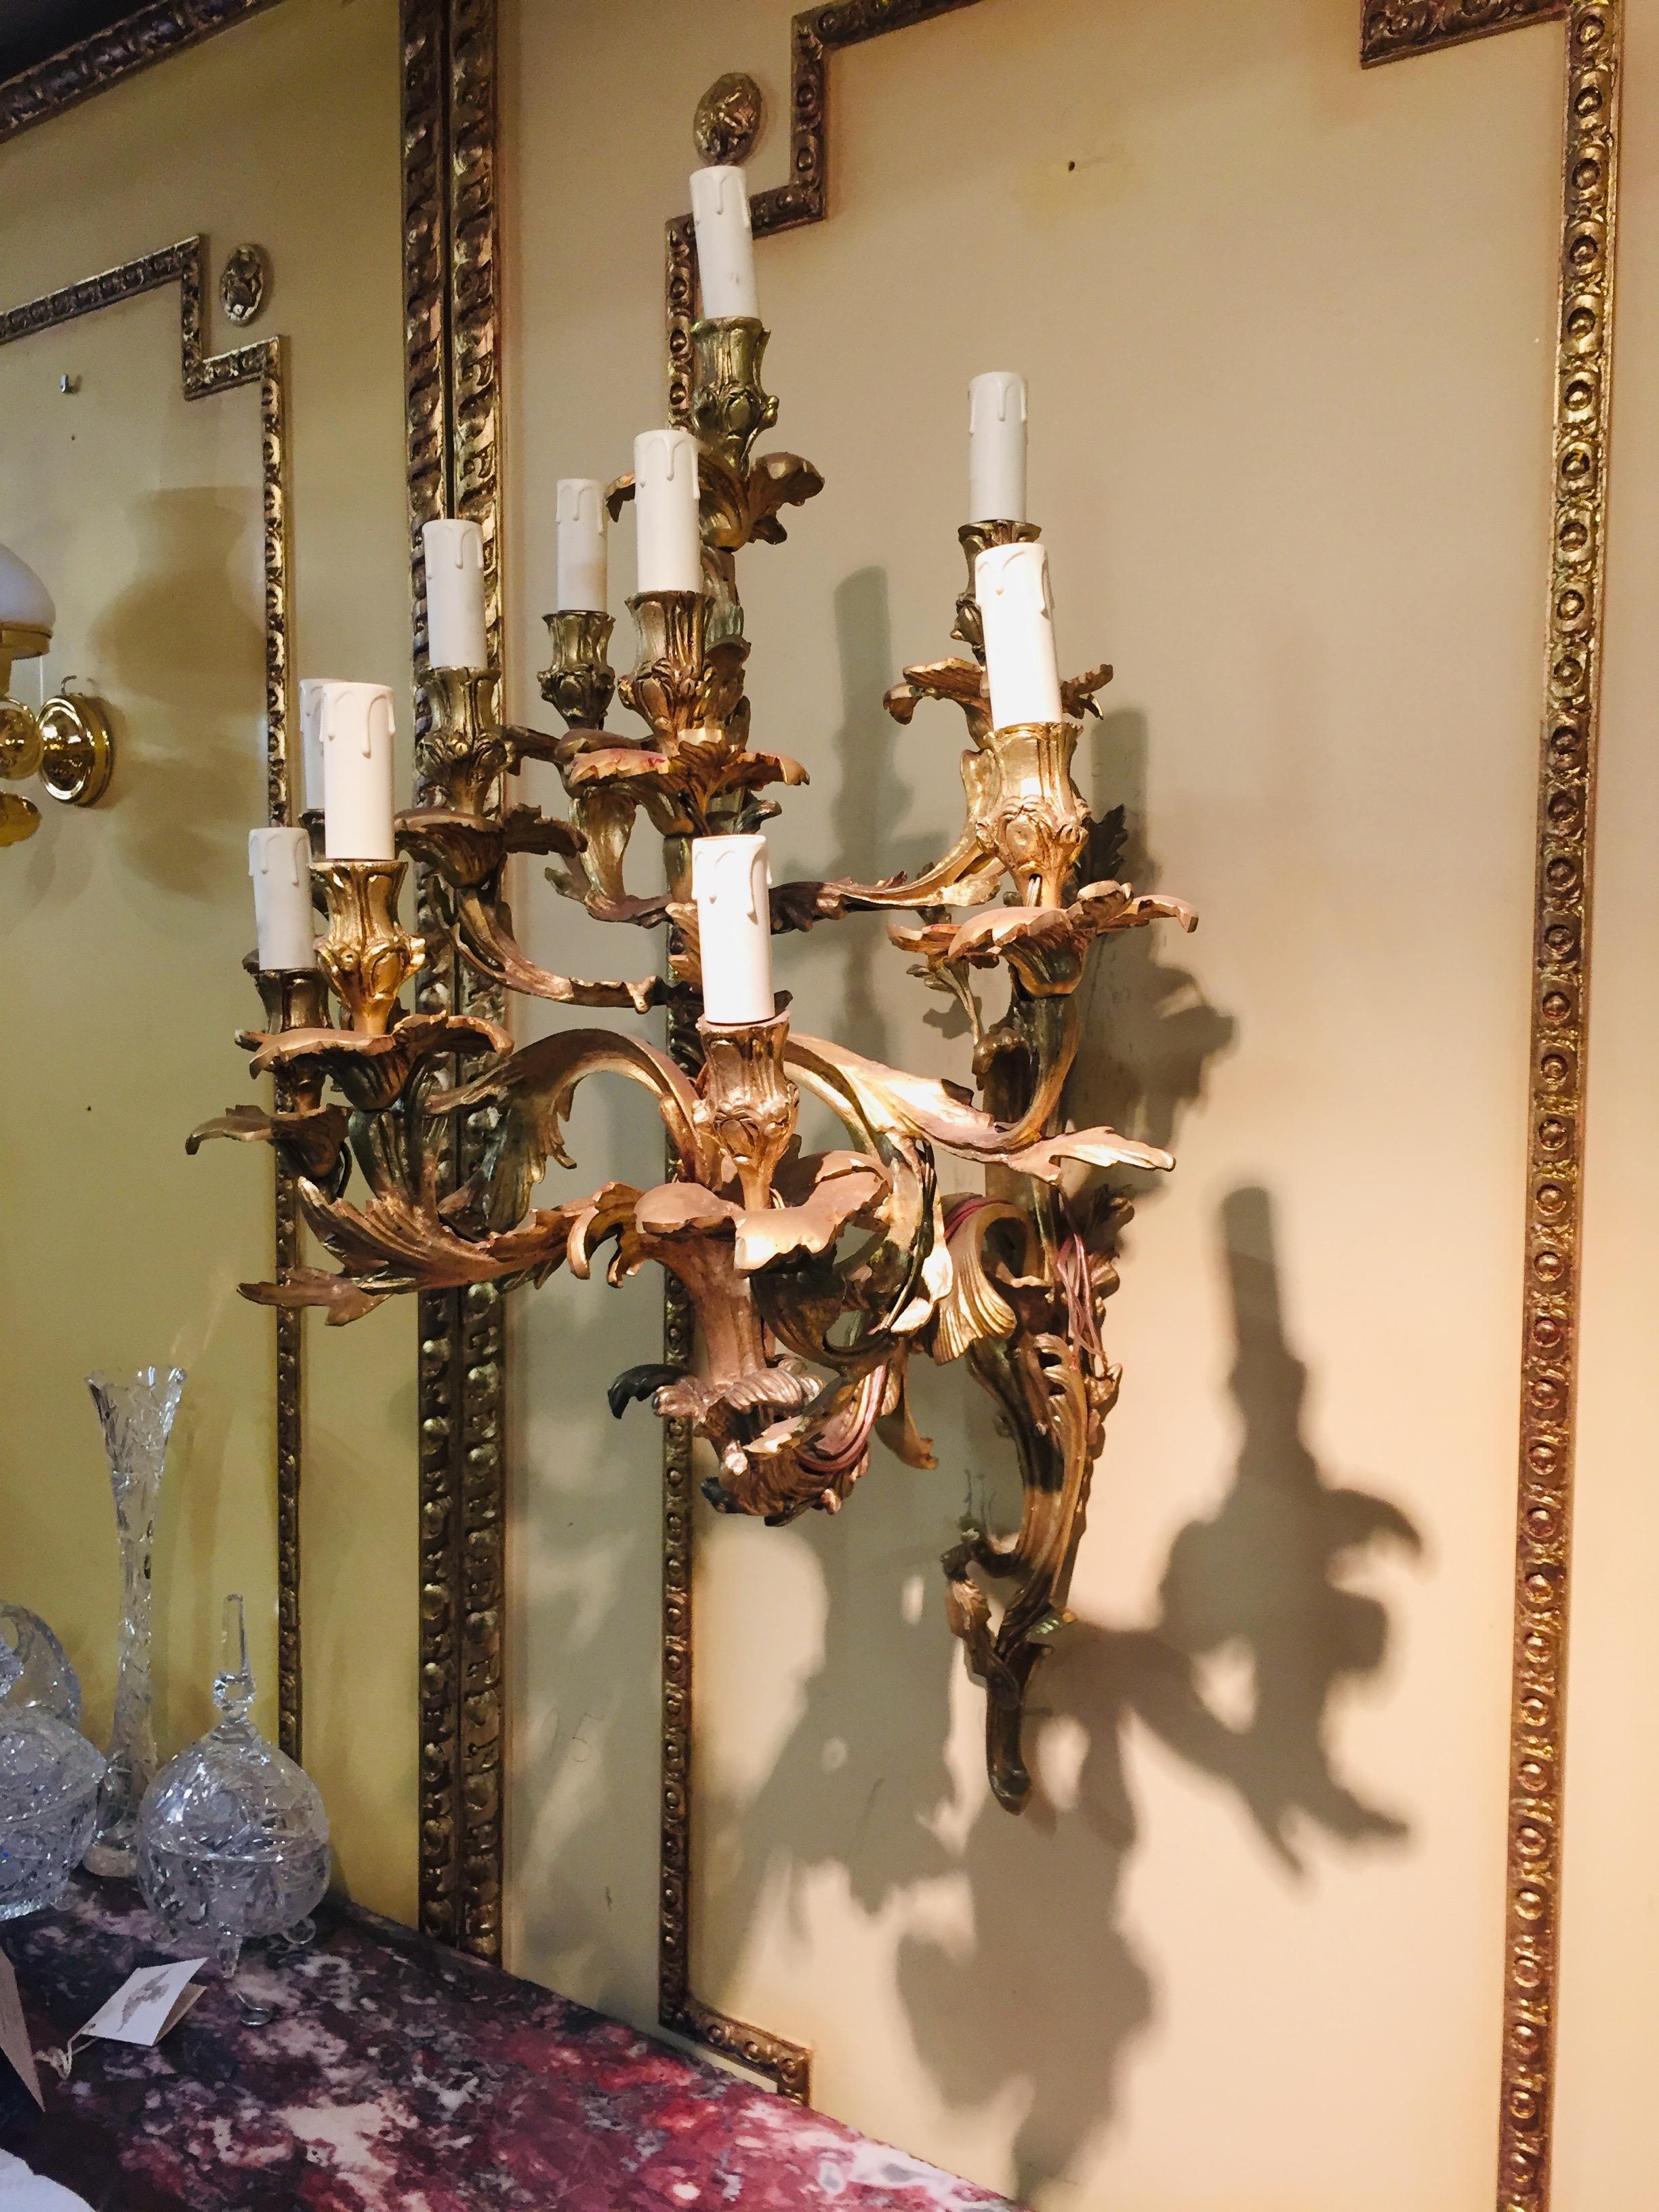 Only this Week Special Price 

An important, monumental Rococo wall applications in the style of the 18th century. Ten-lighted Luminaire. Bronze chiselled. Flat wall sign made from reliefed volutes and acanthus leaves. In the middle of it, ten